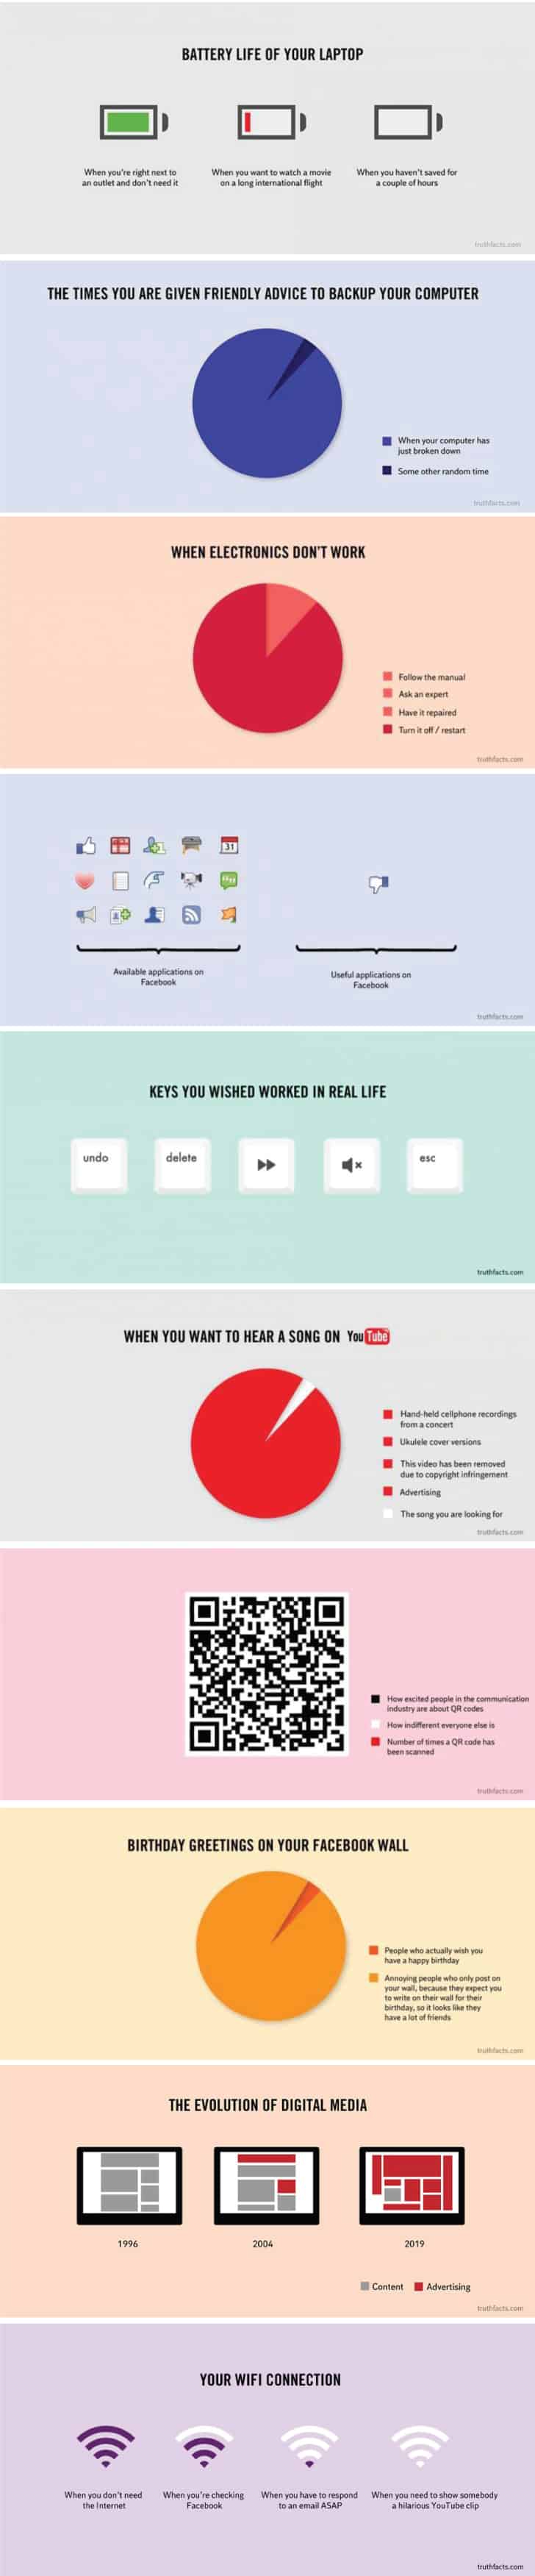 Funny Facts About Your Digital Life | Daily Infographic